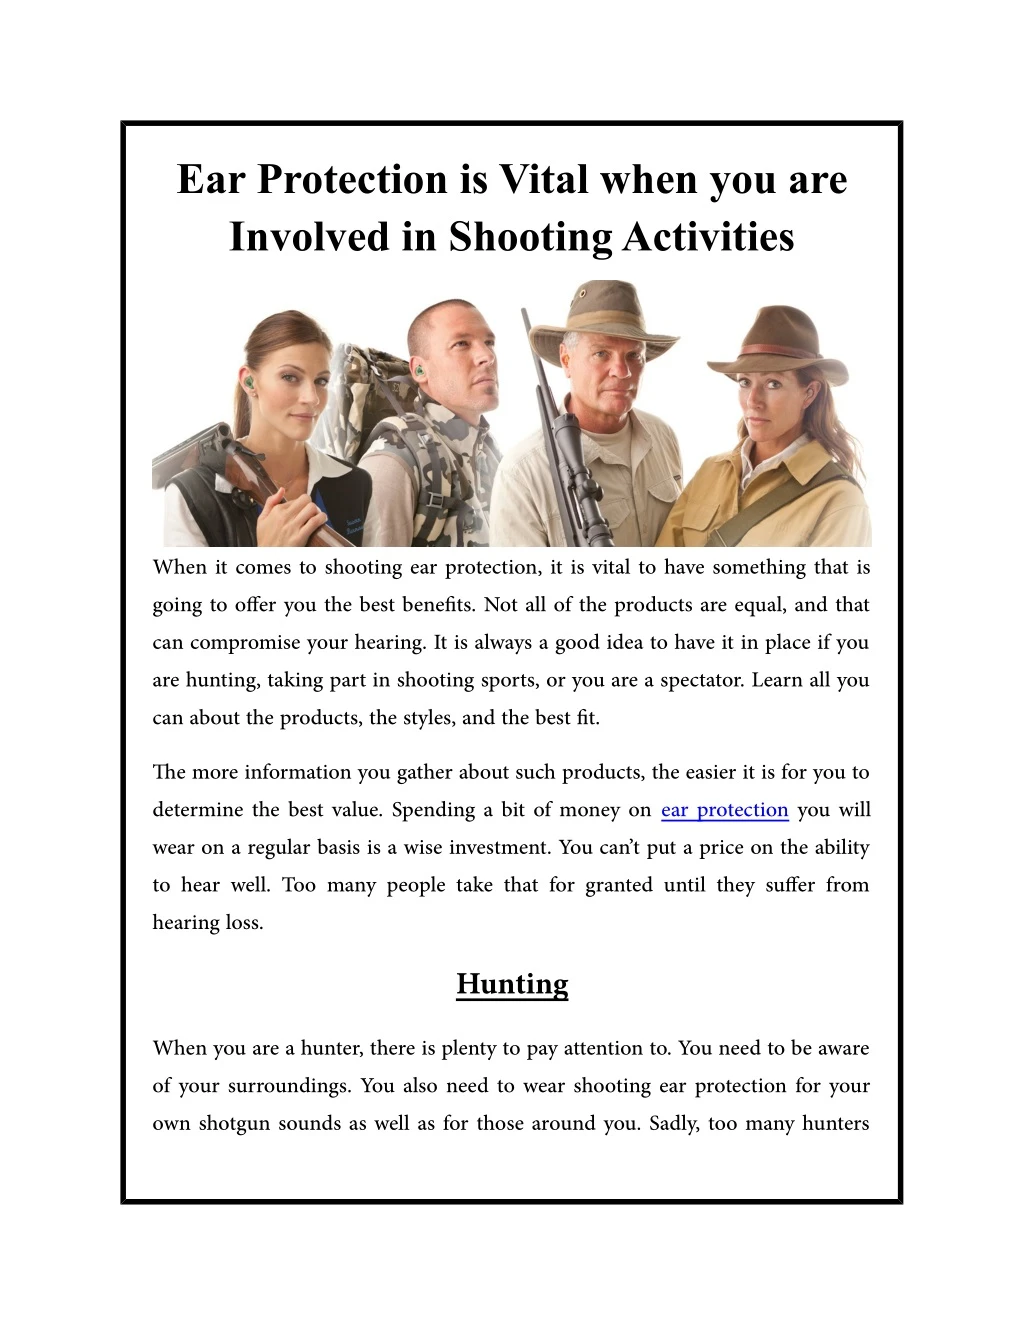 ear protection is vital when you are involved